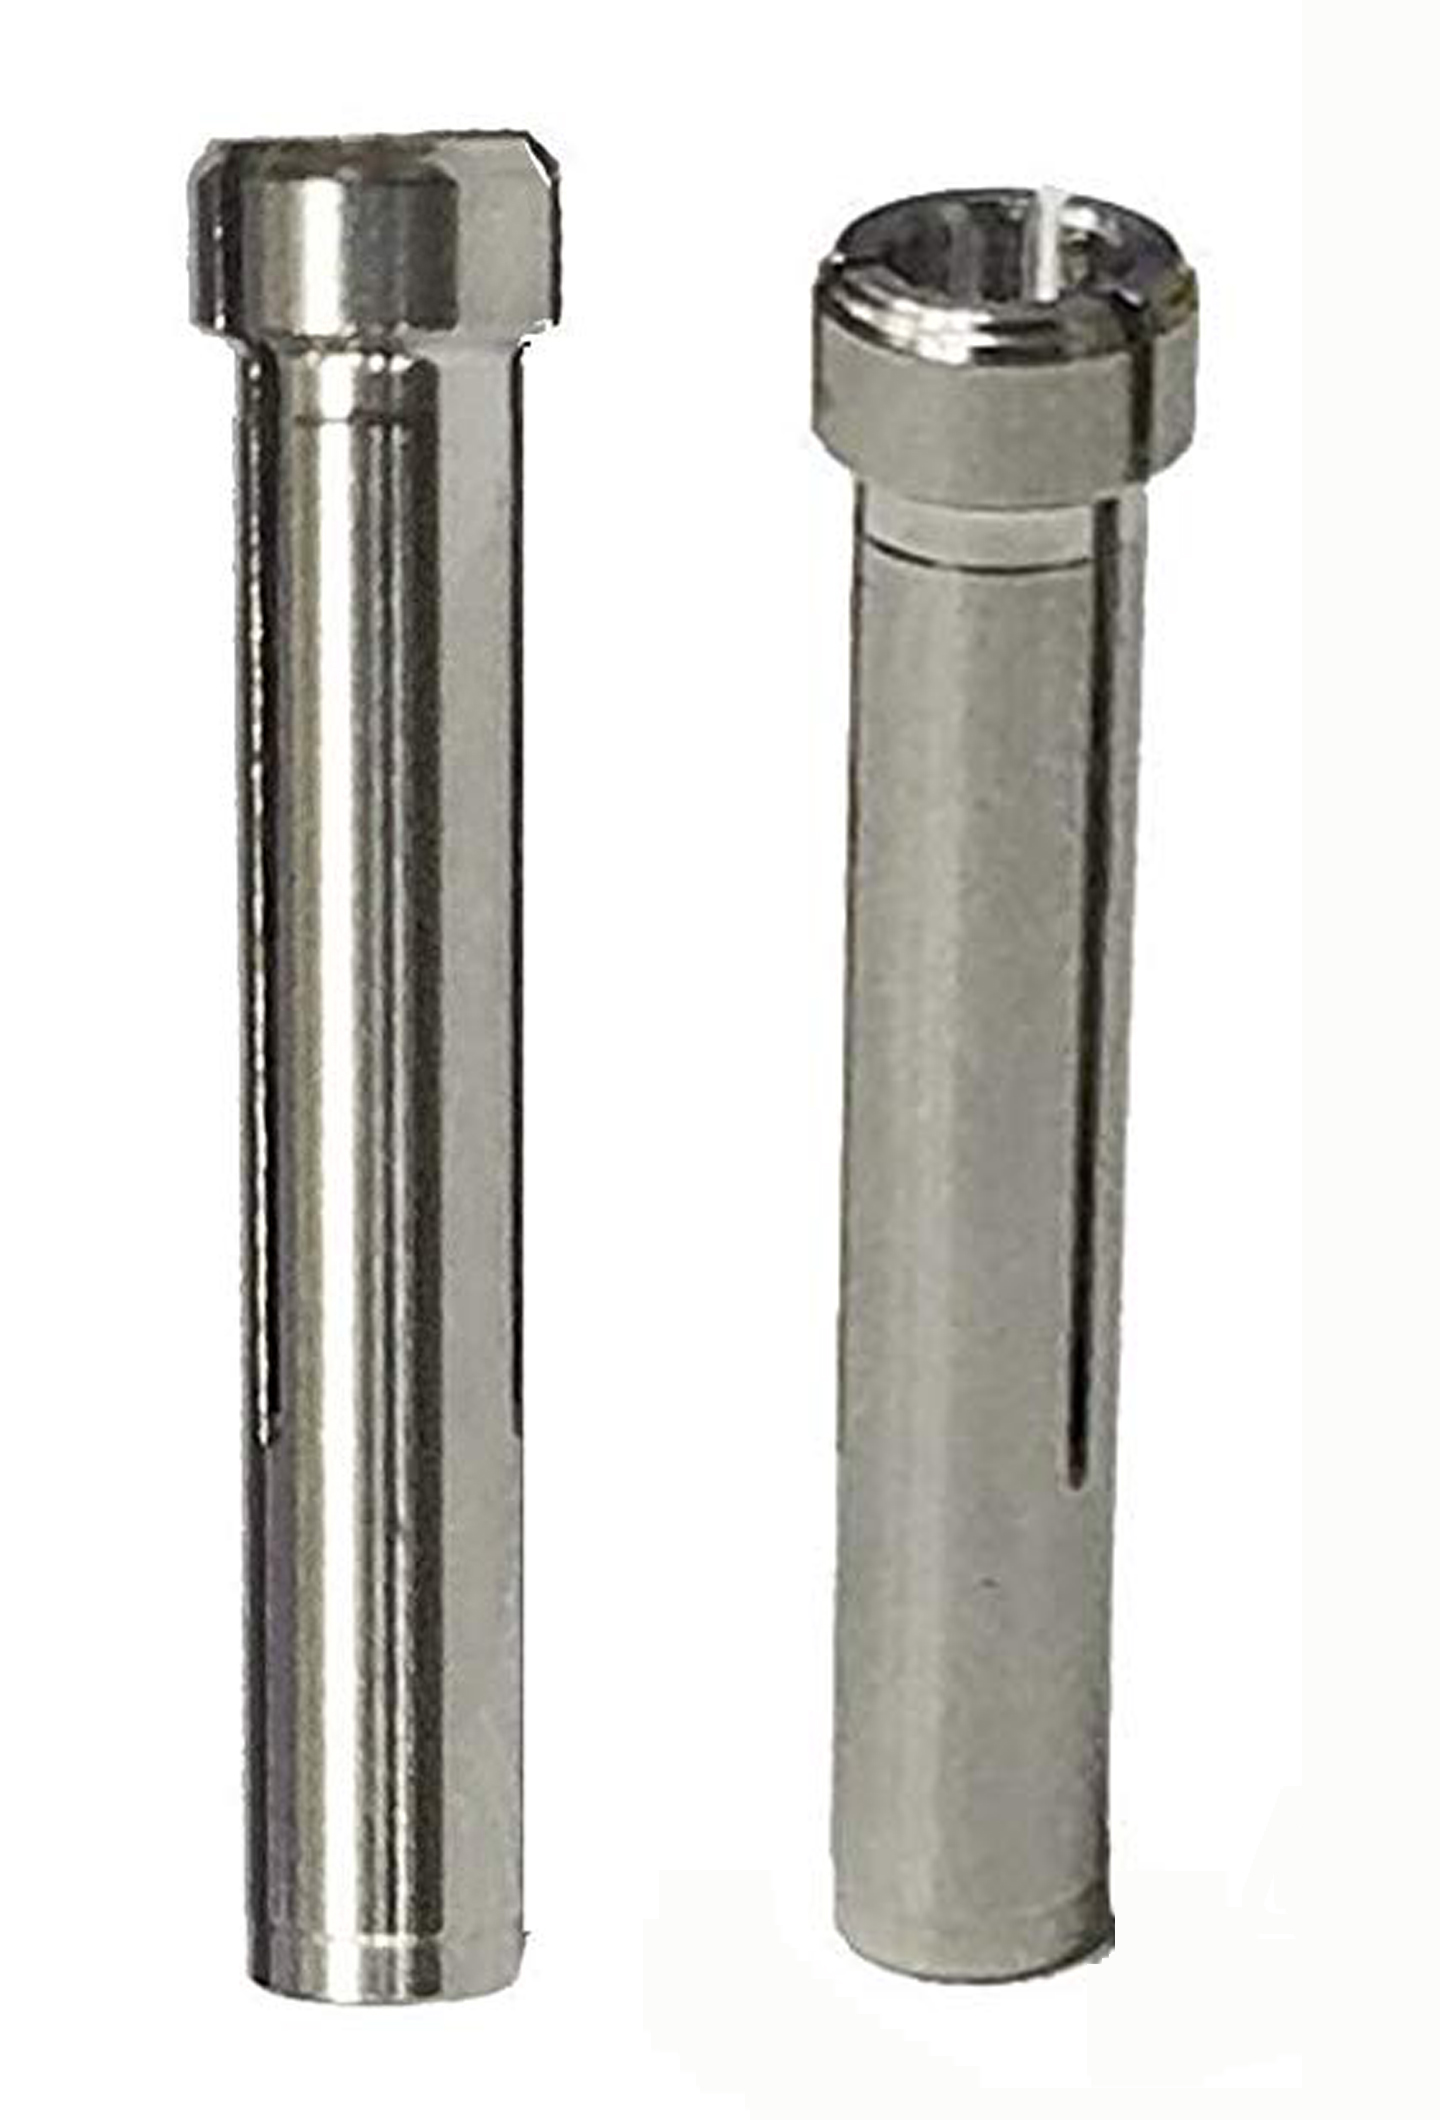 COLLETT TO CONVERT MARATHON HANDPIECE TO 3mm (not 1/8") - Click Image to Close